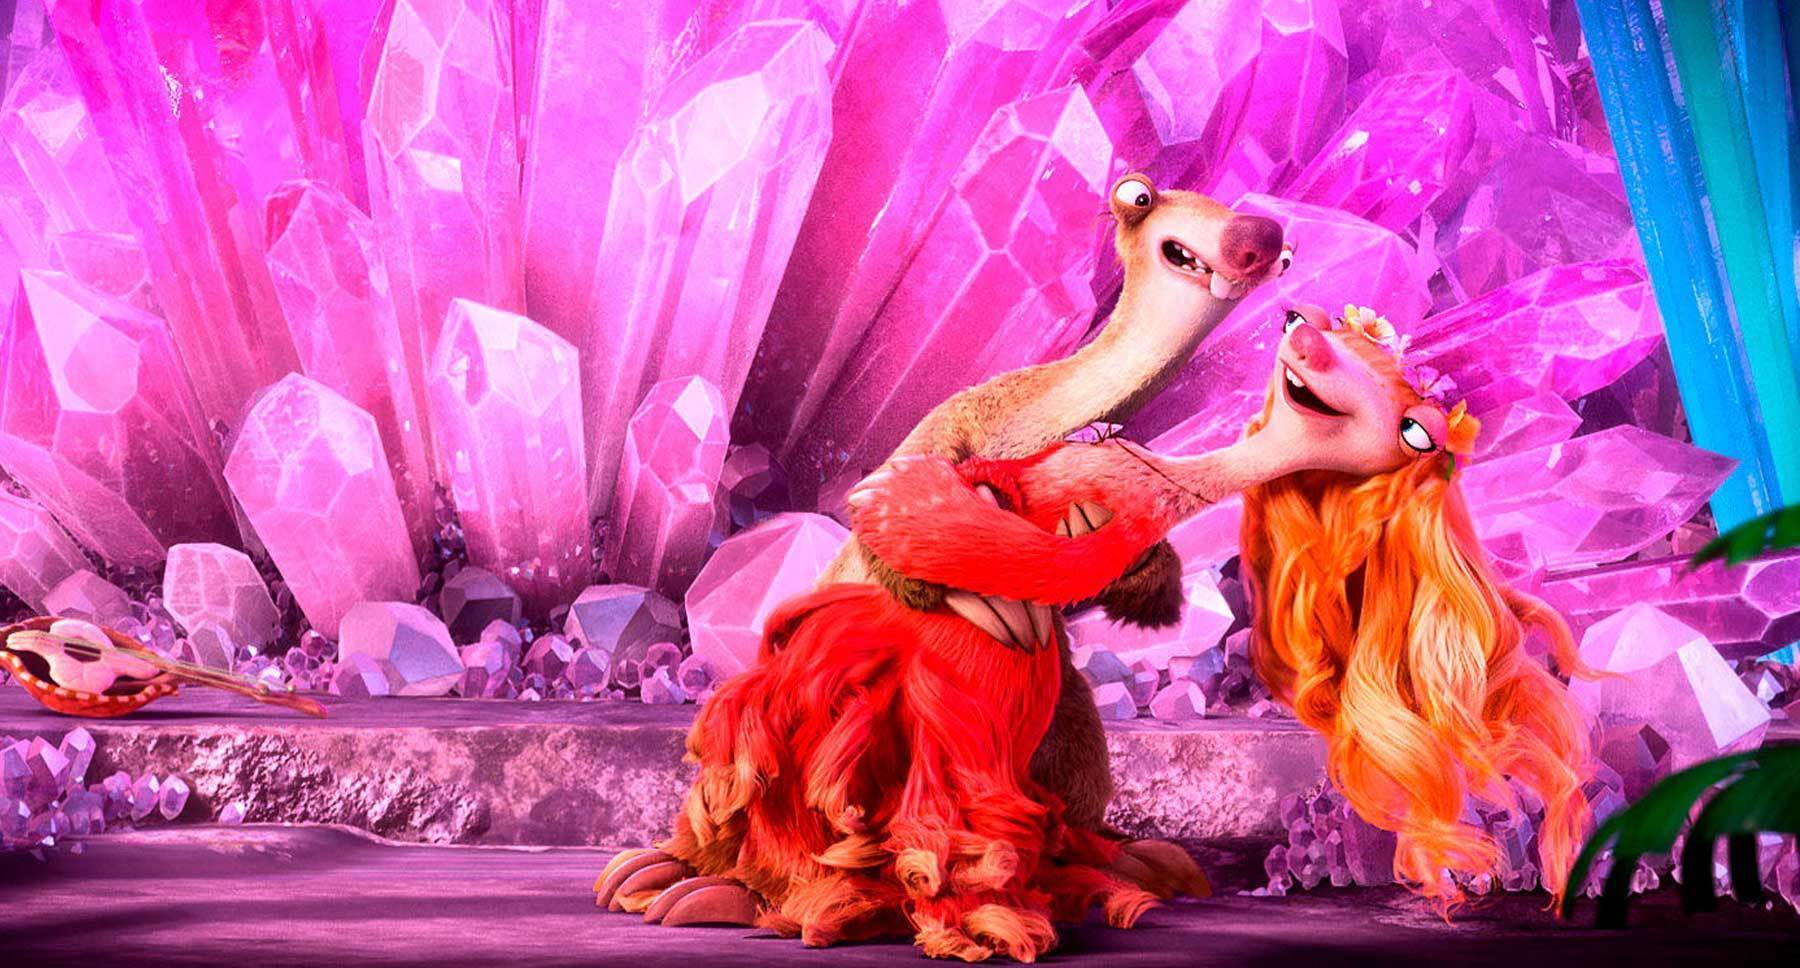 Actors John Leguizamo (as Sid) and Jessie J (as Brooke) in the movie "Ice Age: Collision Course"